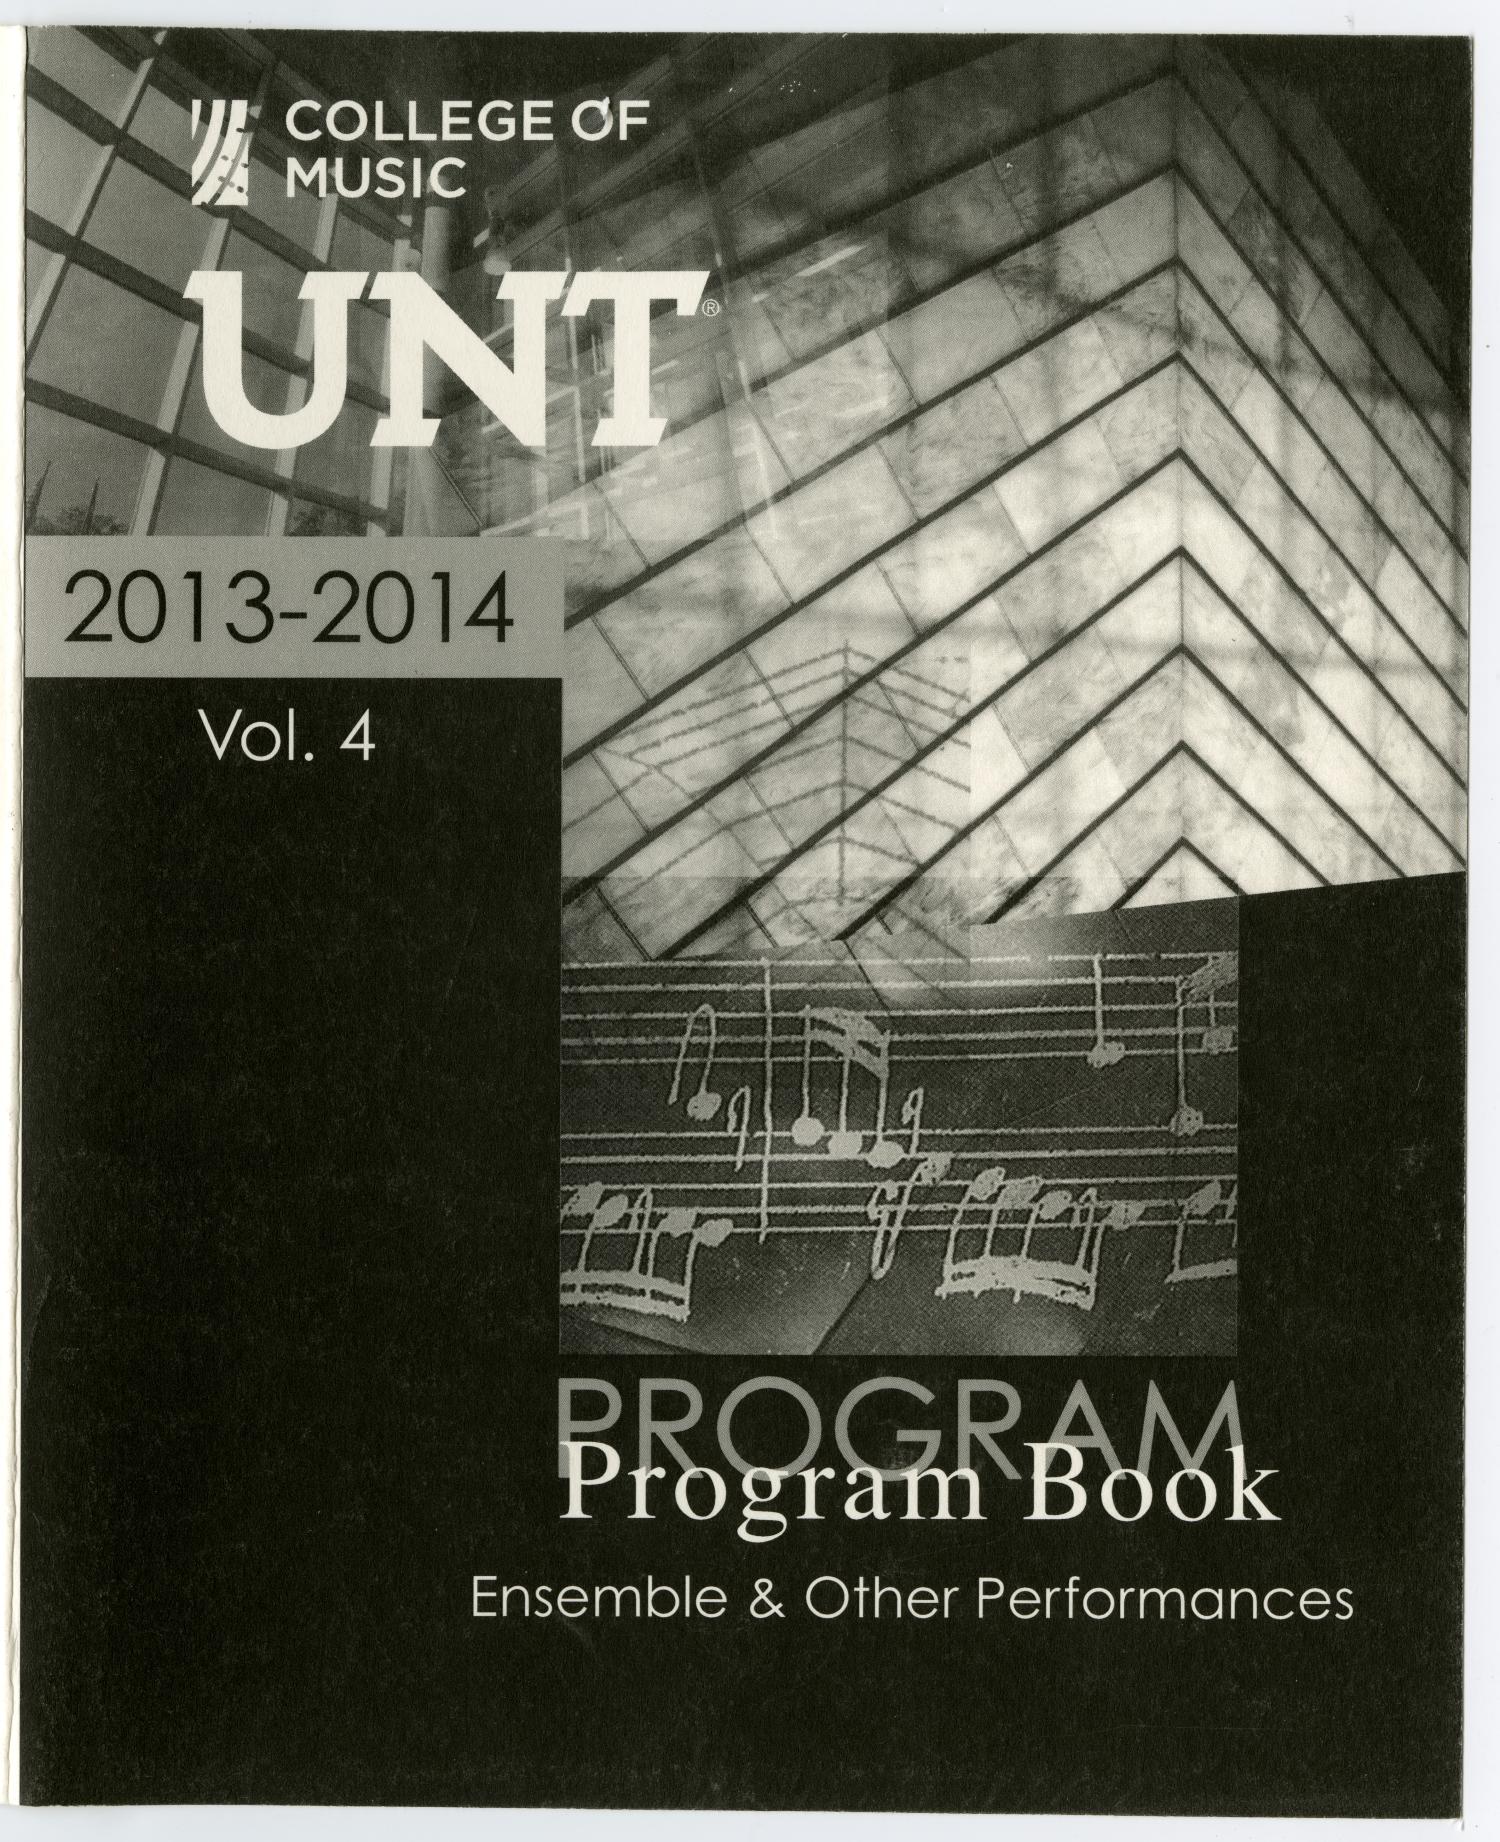 College of Music Program Book 2013-2014: Ensemble & Other Performances, Volume 4
                                                
                                                    [Sequence #]: 1 of 393
                                                